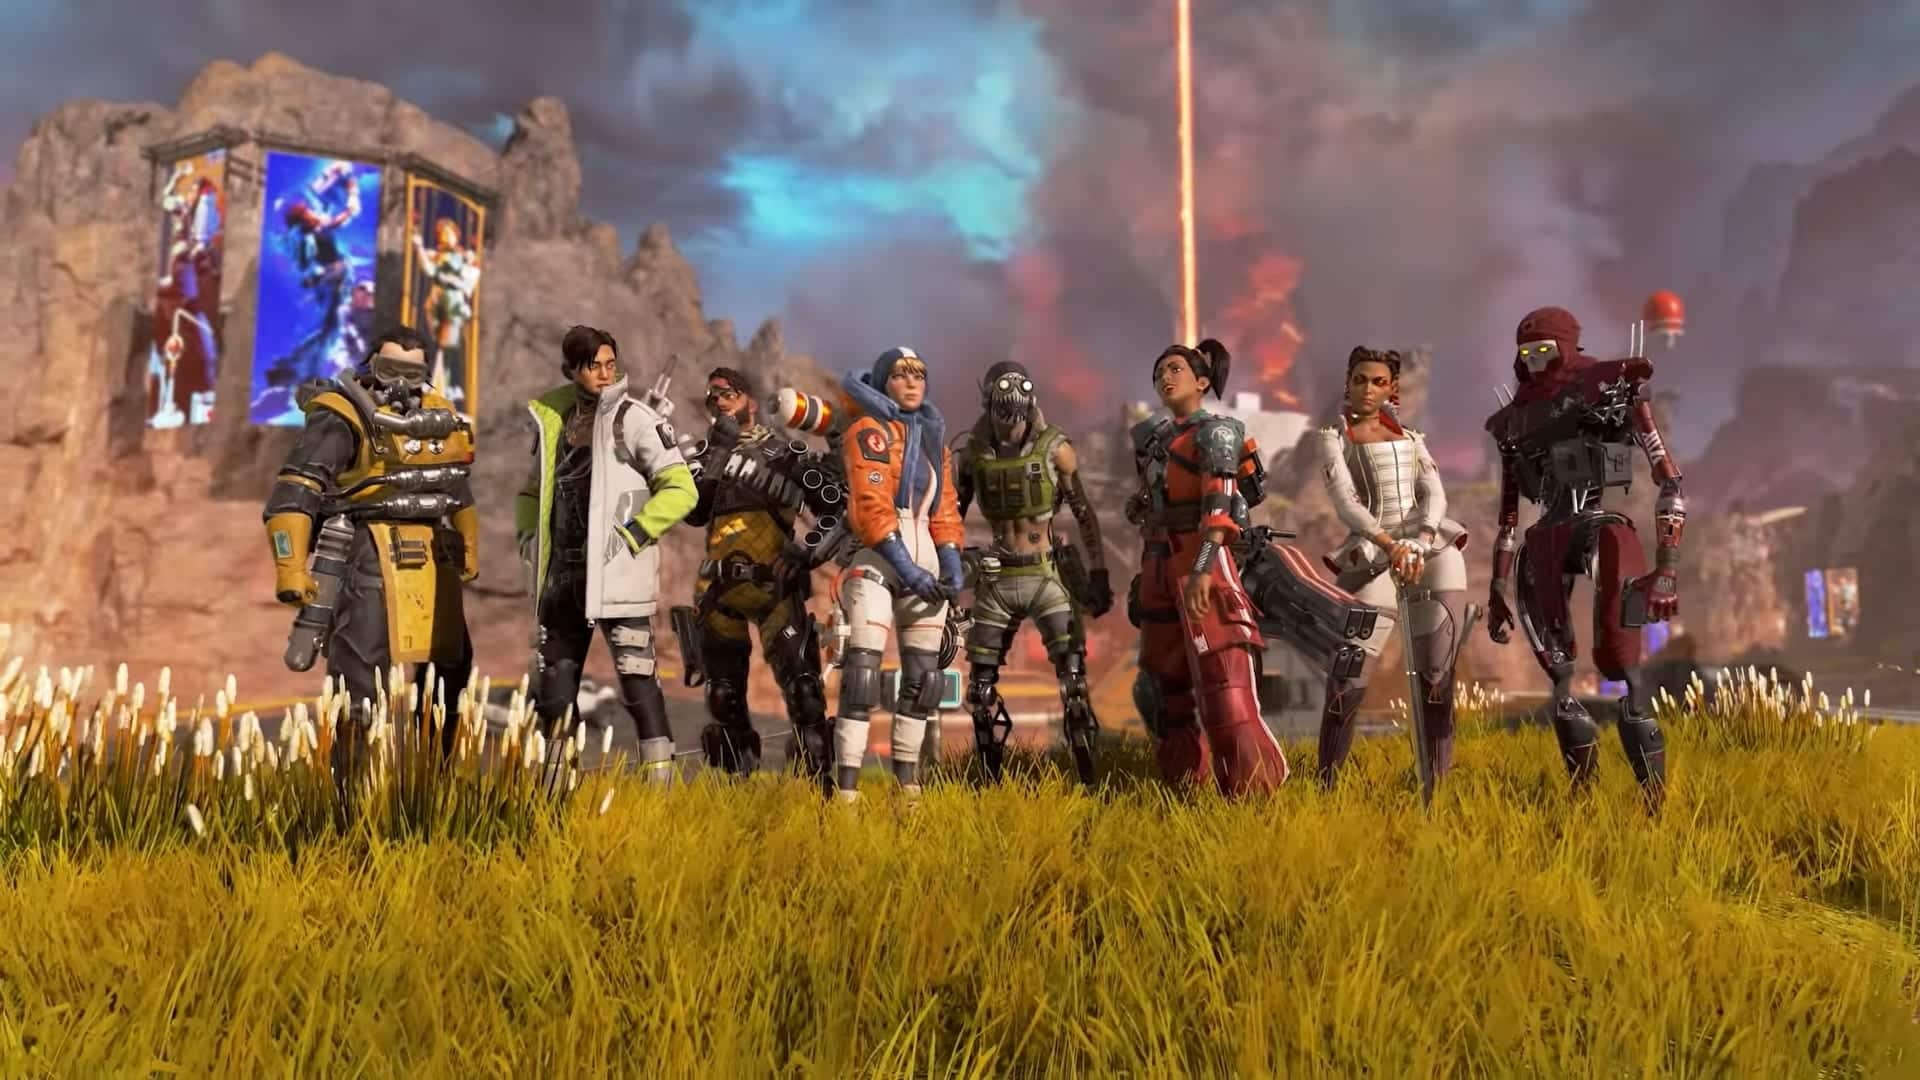 Apex Legends characters lined up 